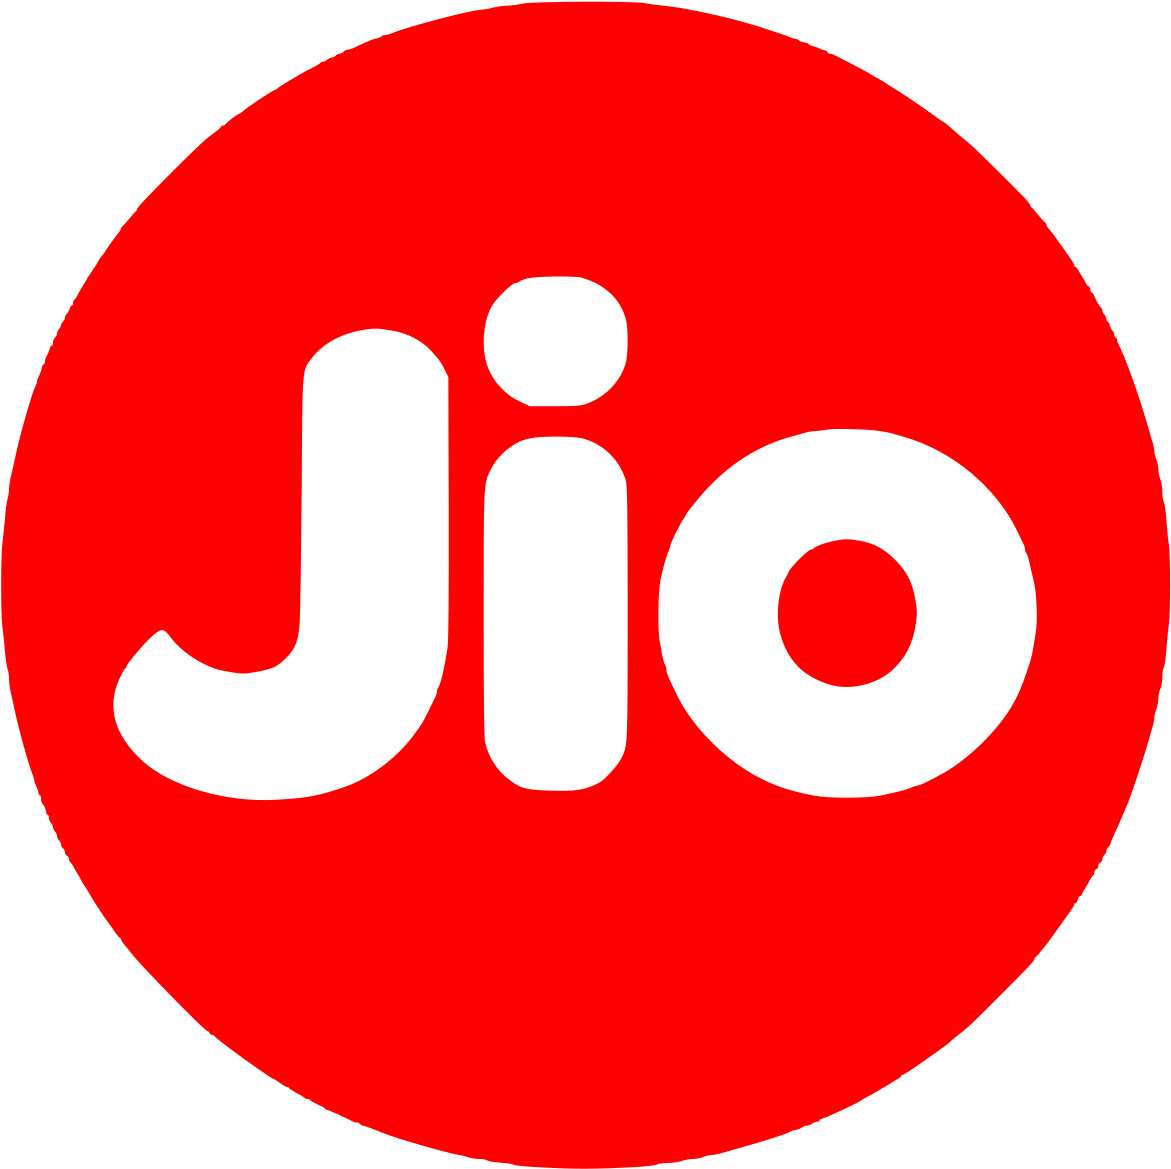 Reliance Jio Launched Happy New Year 2018 Plan - Reliance Jio Logo Png (1200x1200)